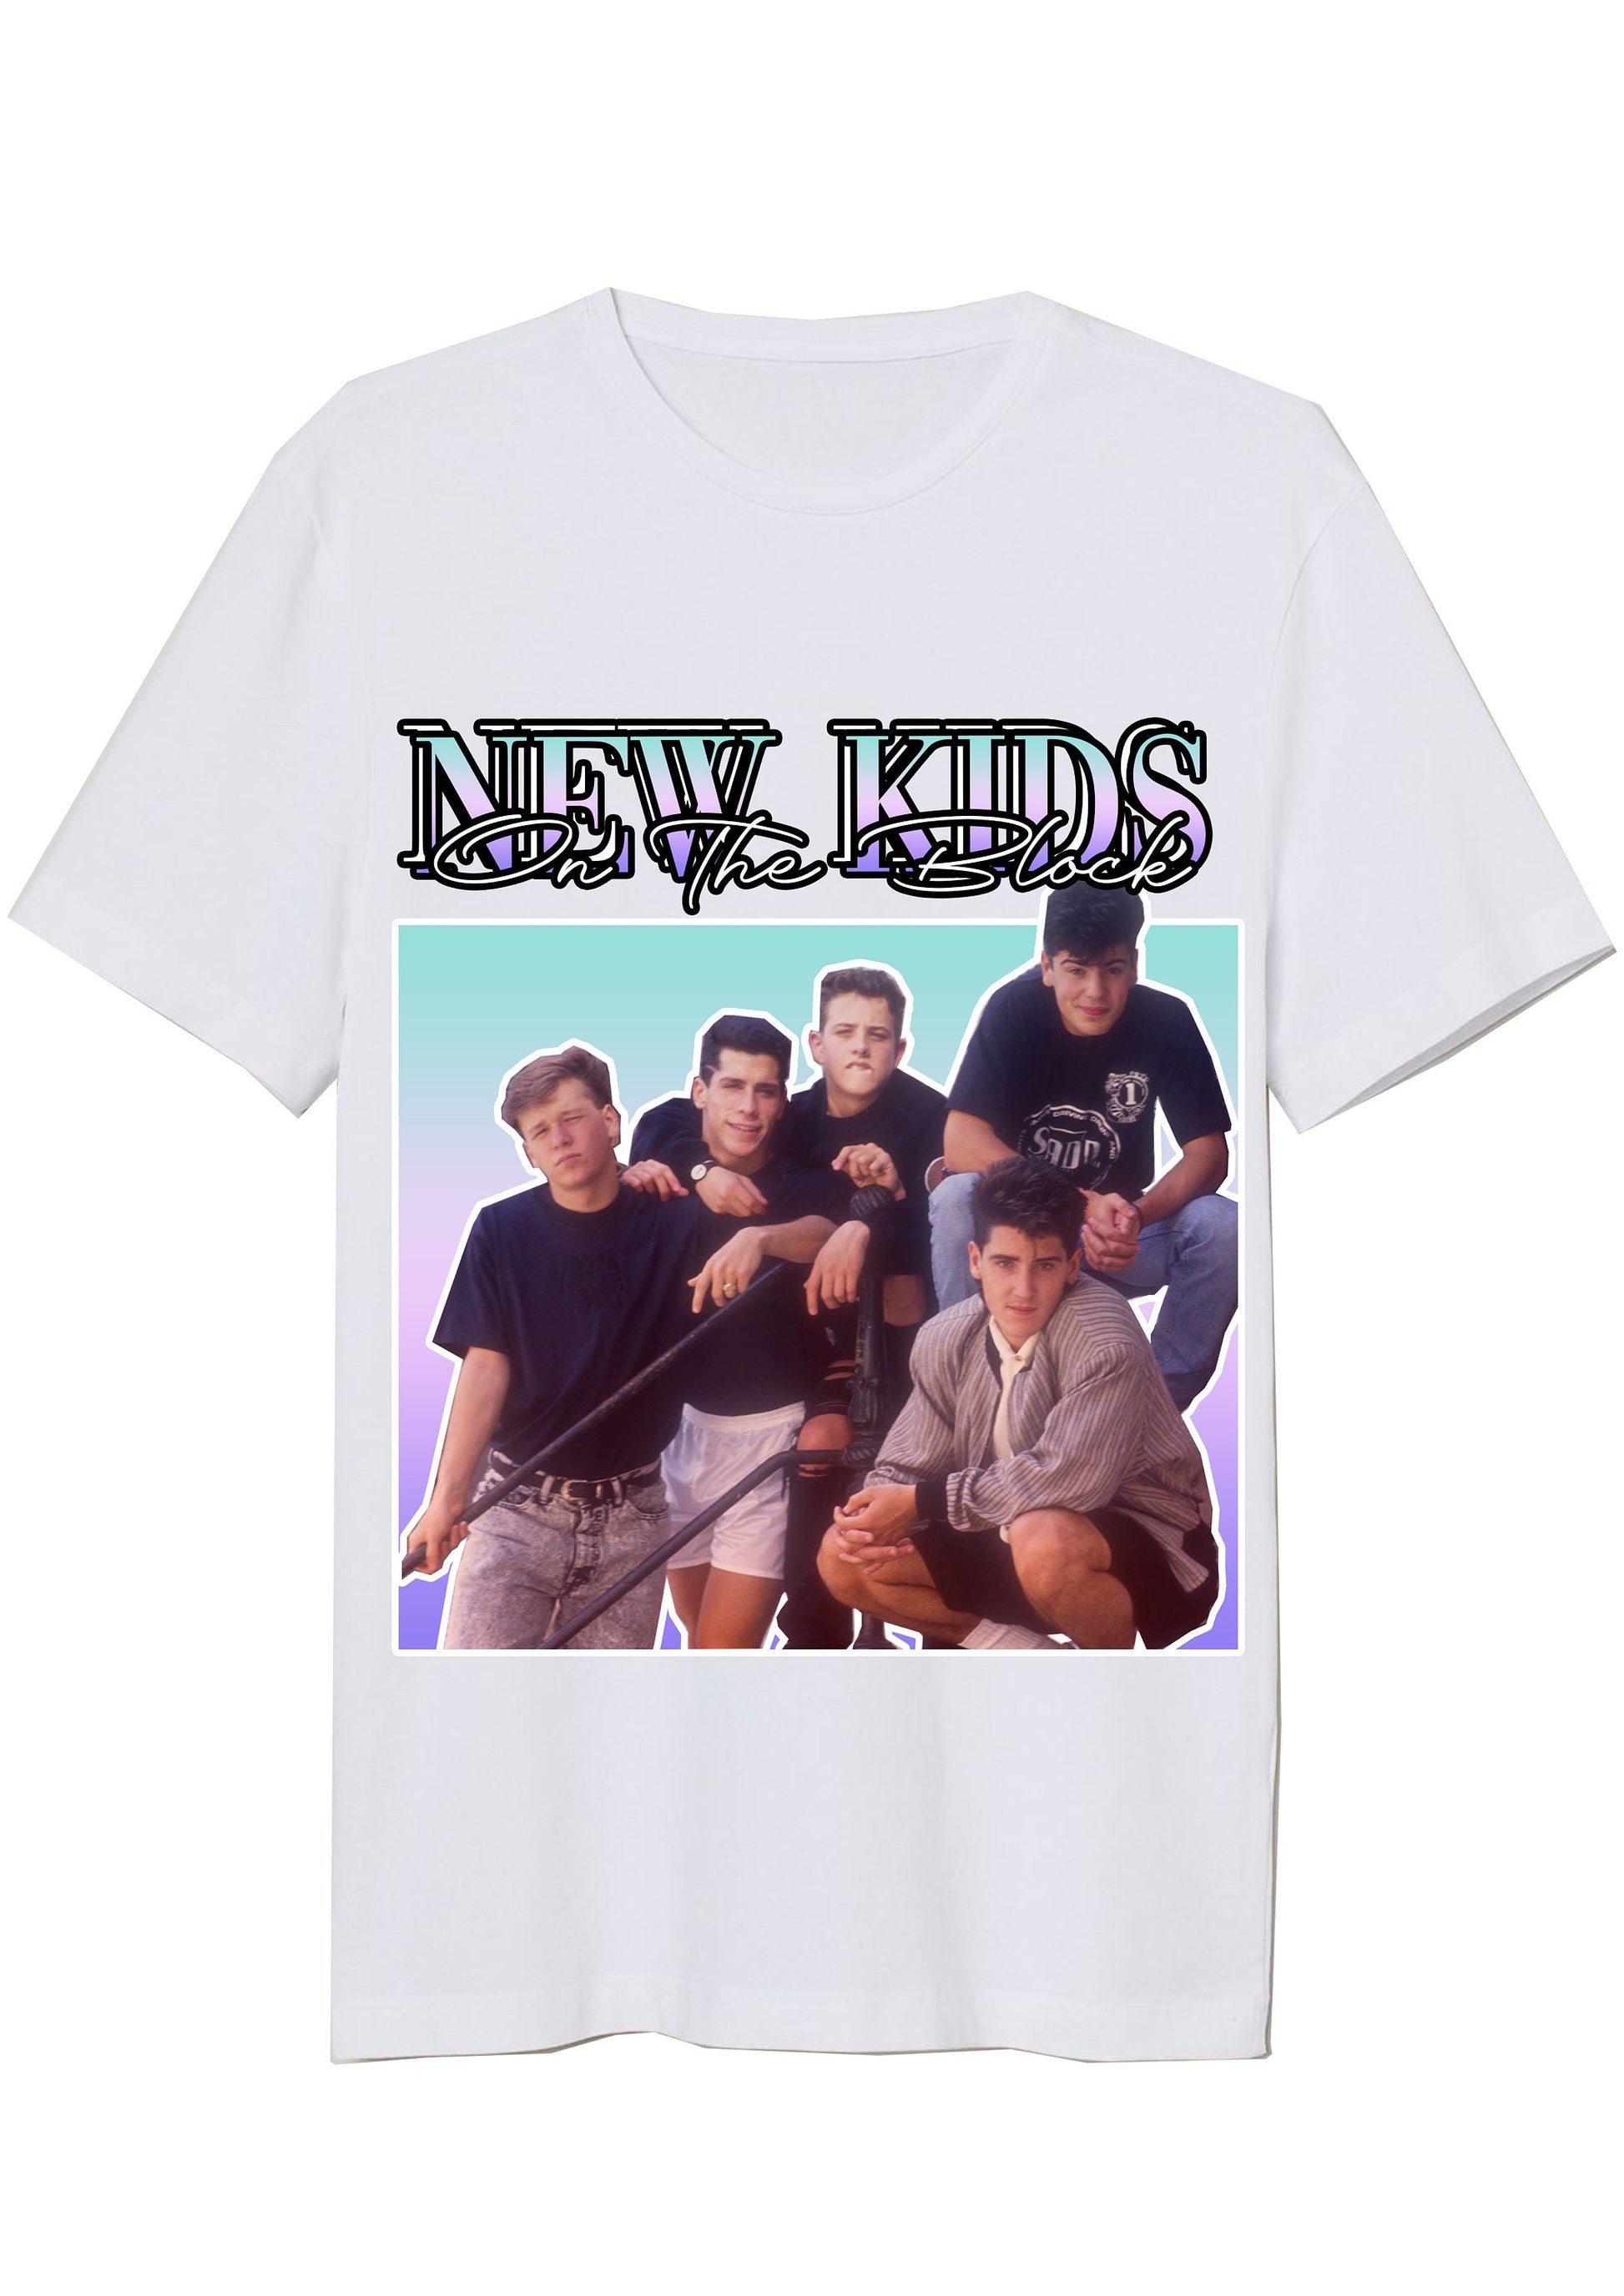 røg Punktlighed Daisy New Kids On The Block Vintage T-Shirt – LOST SEOULS CLUB